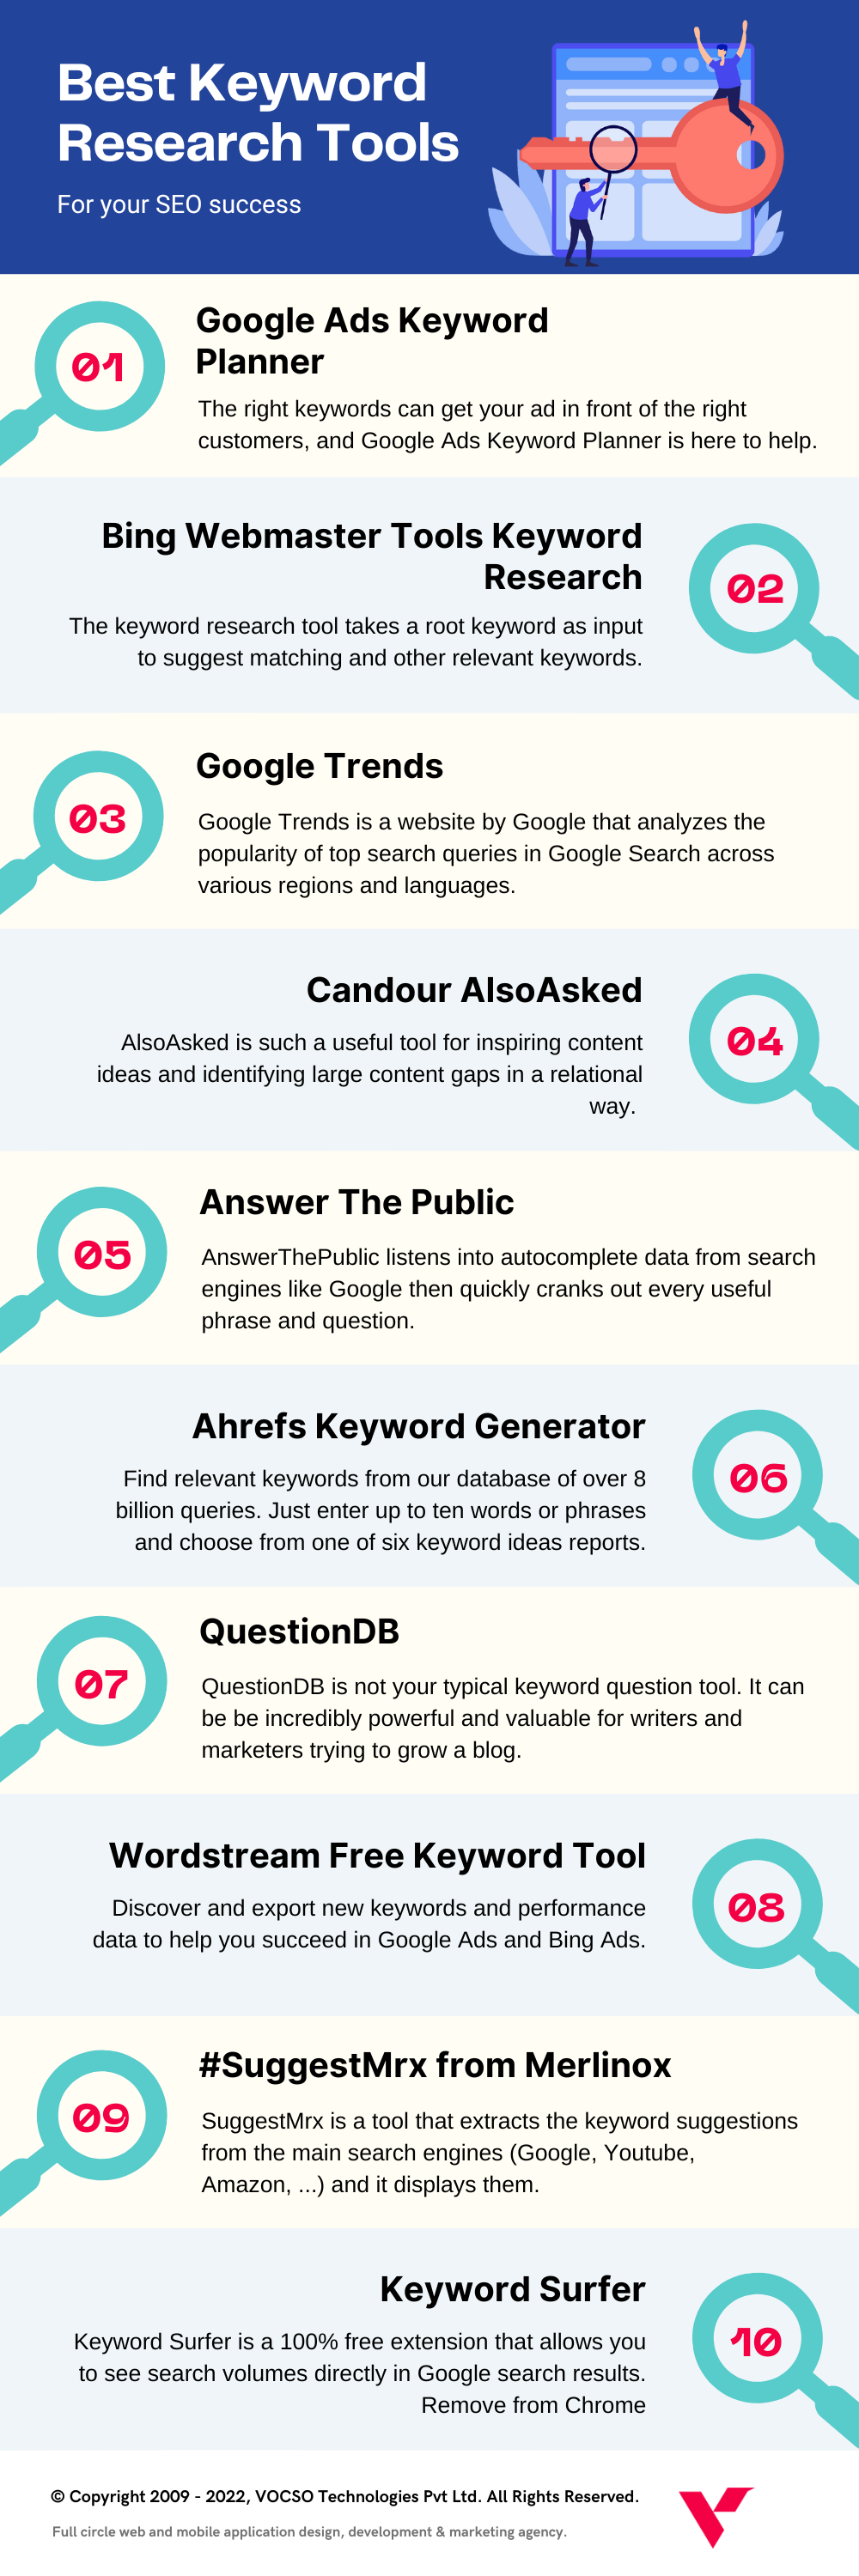 Best Keyword Research Tools for Your SEO Success in 2022
